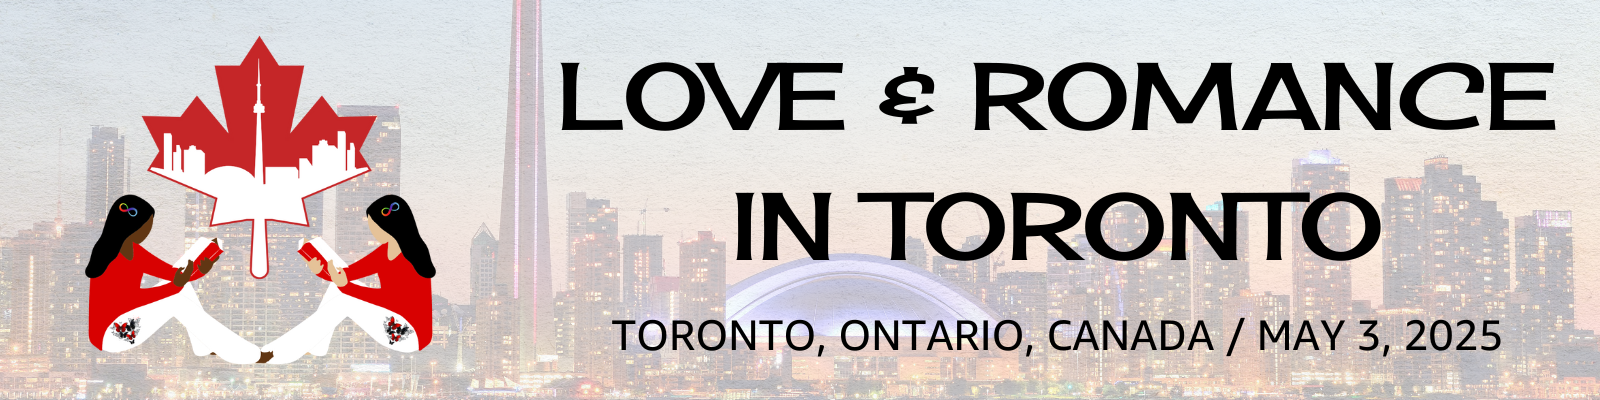 Love & Romance in Toronto Book Signing